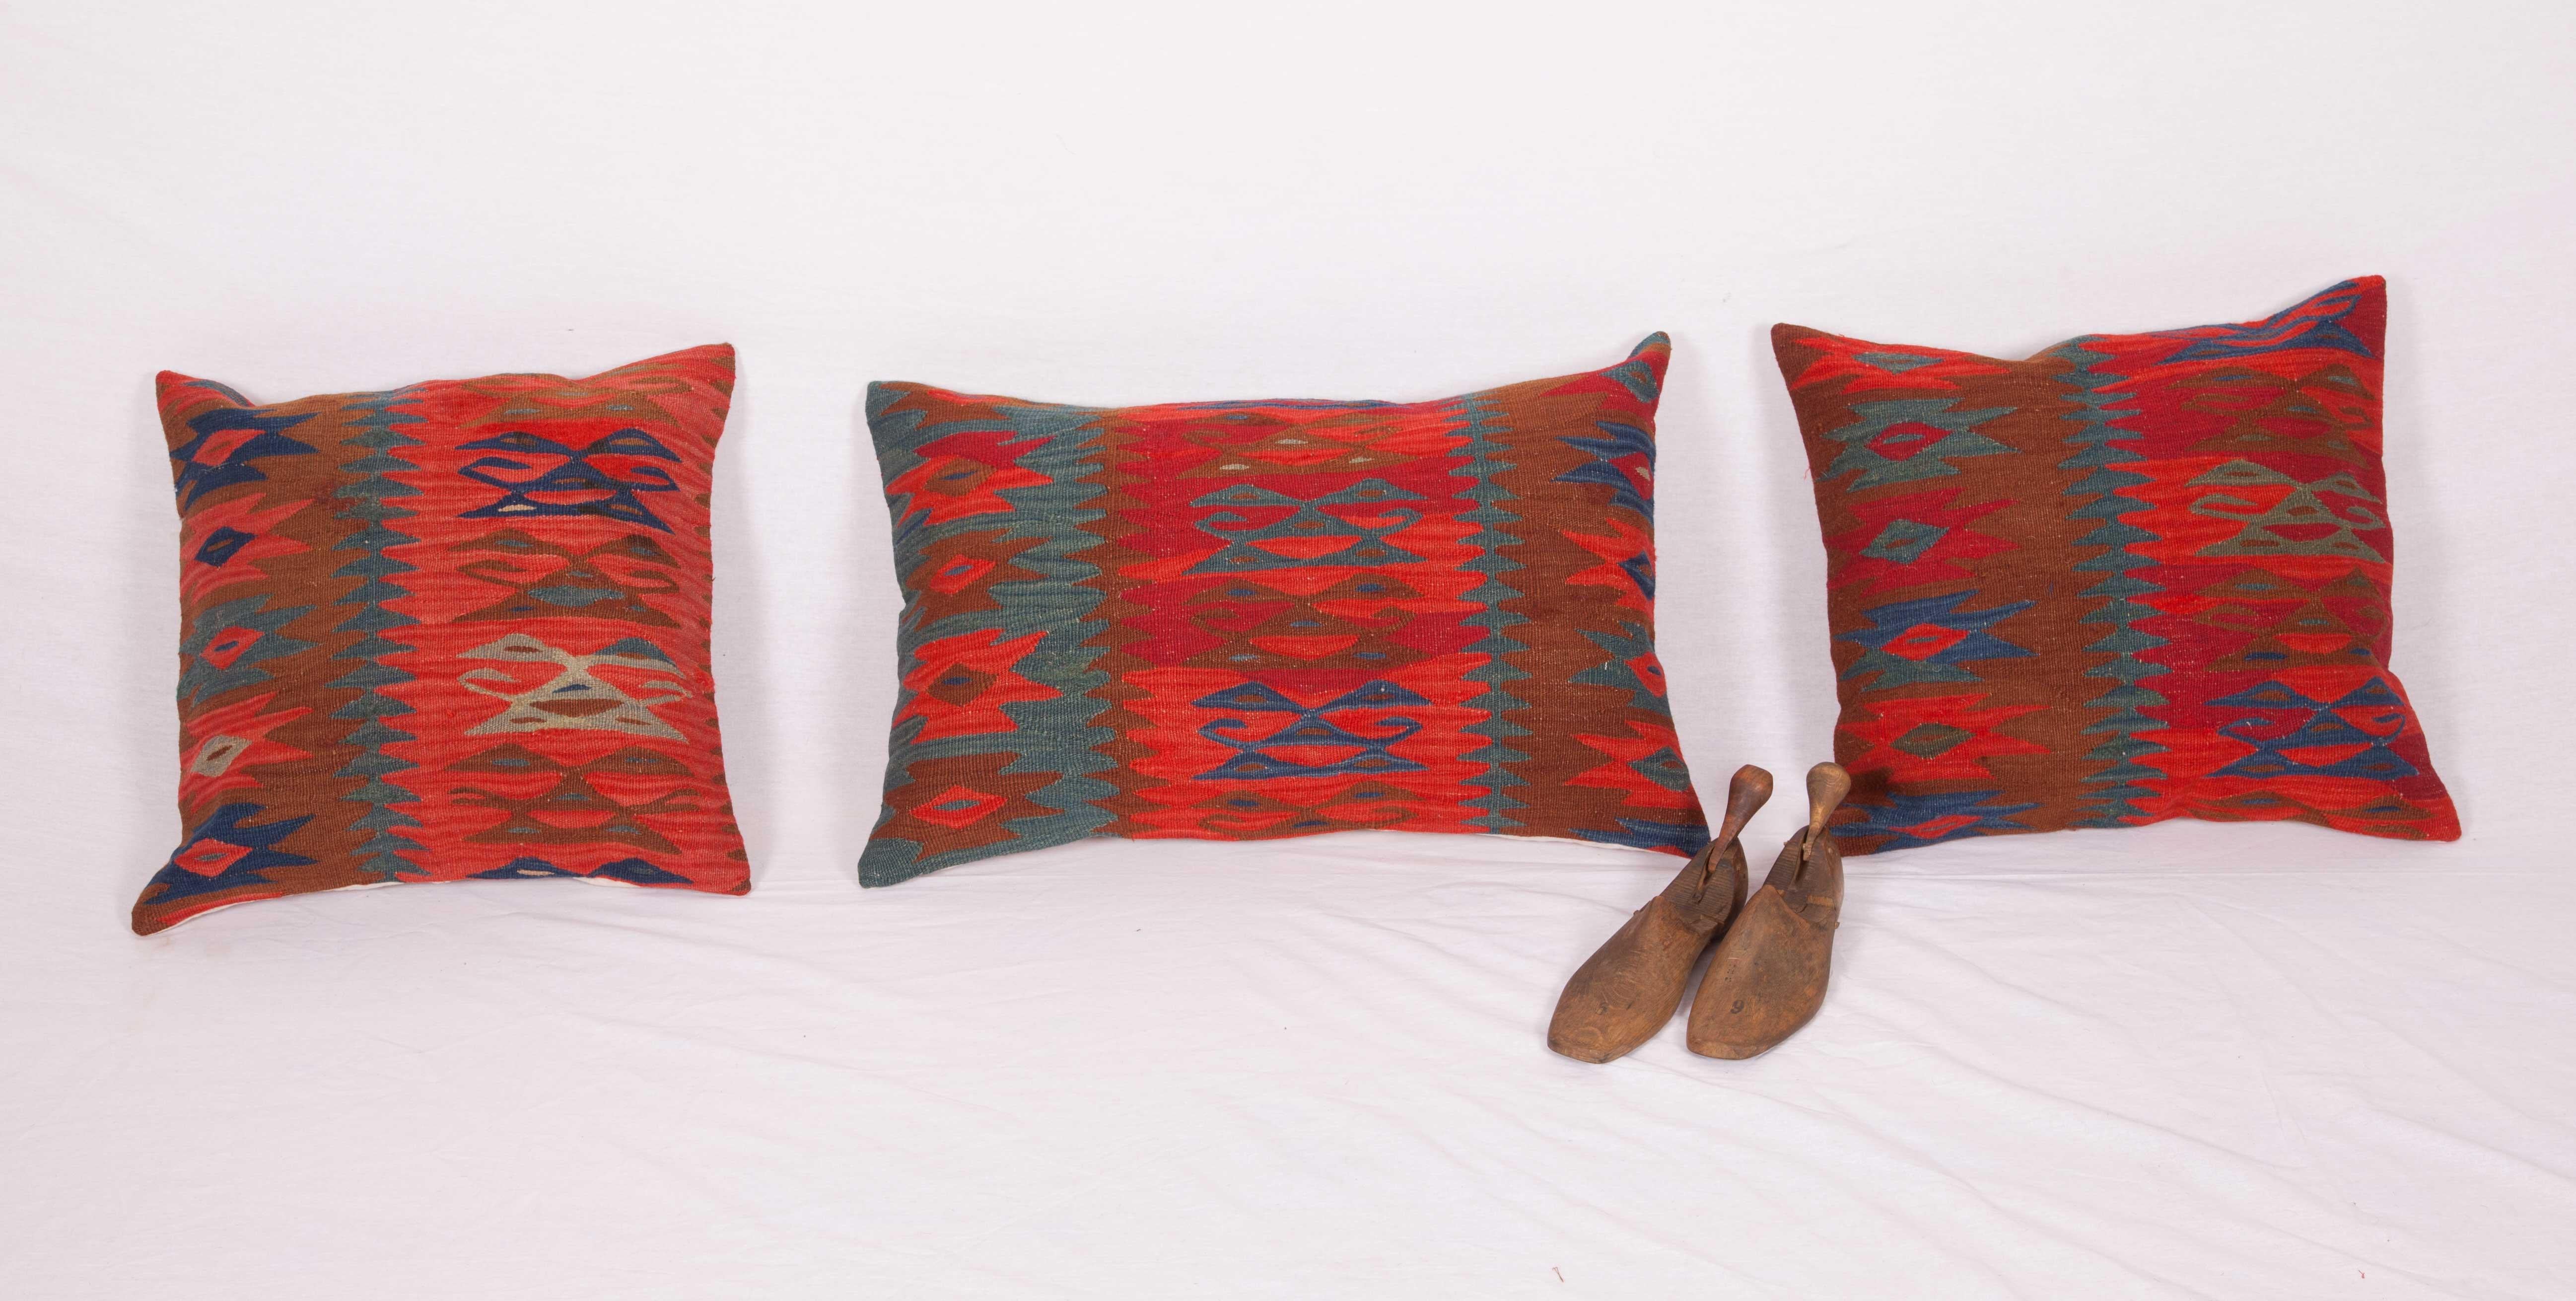 Balkan Antique Kilim Pillow Cases Fashioned from a Late 19th Century, Sharkoy Kilim